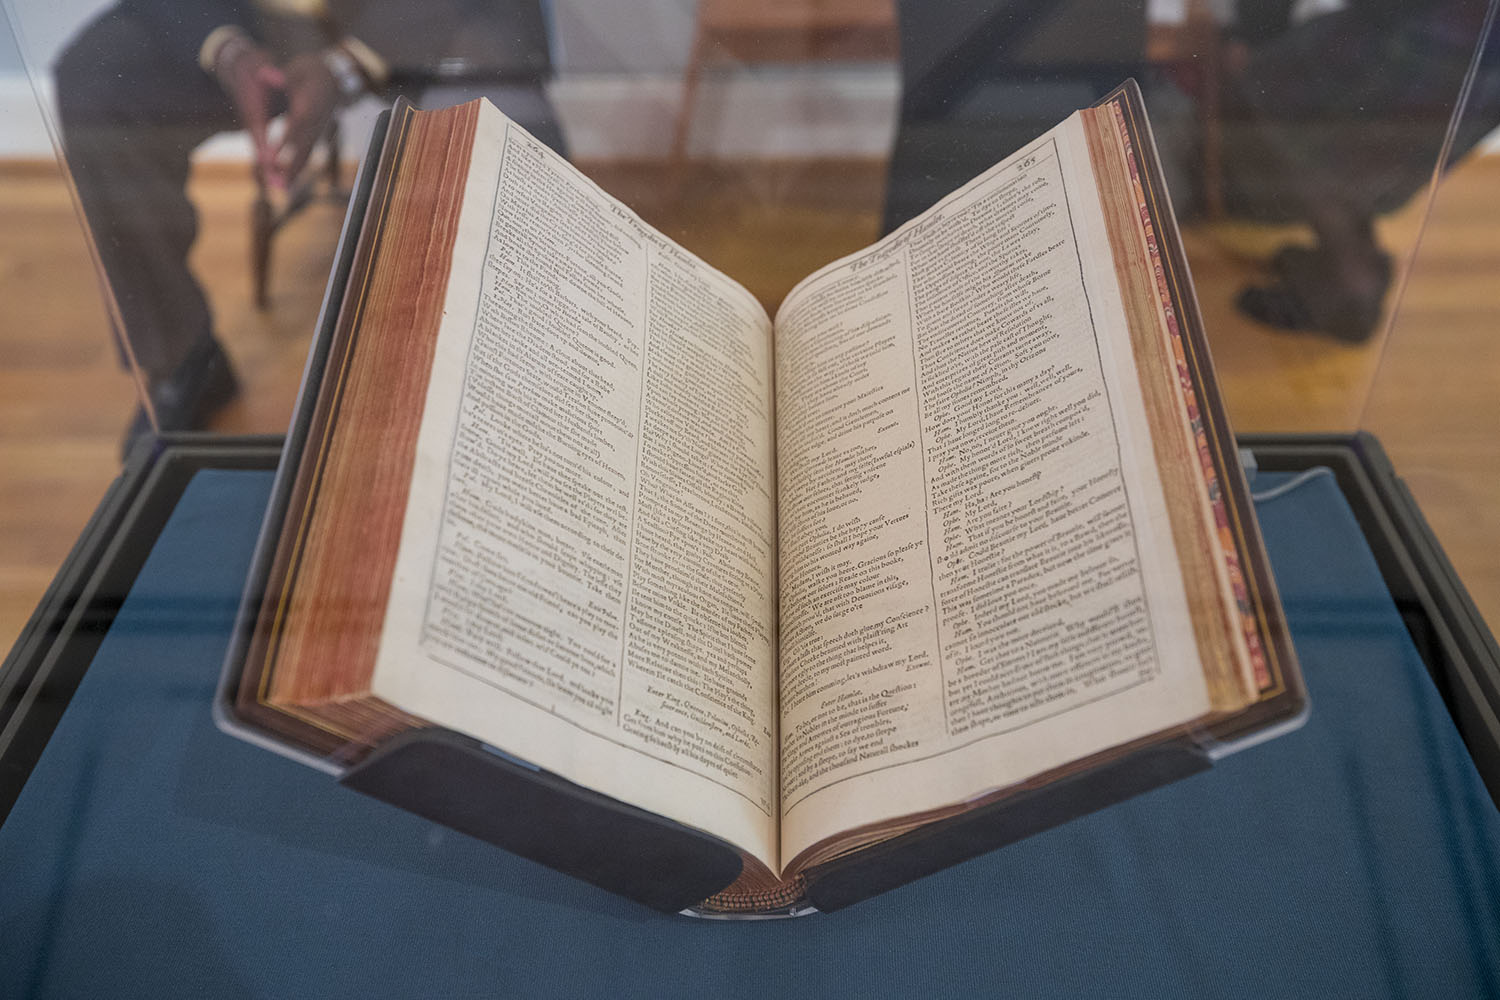 The First Folio – opened on a stand in a glass case